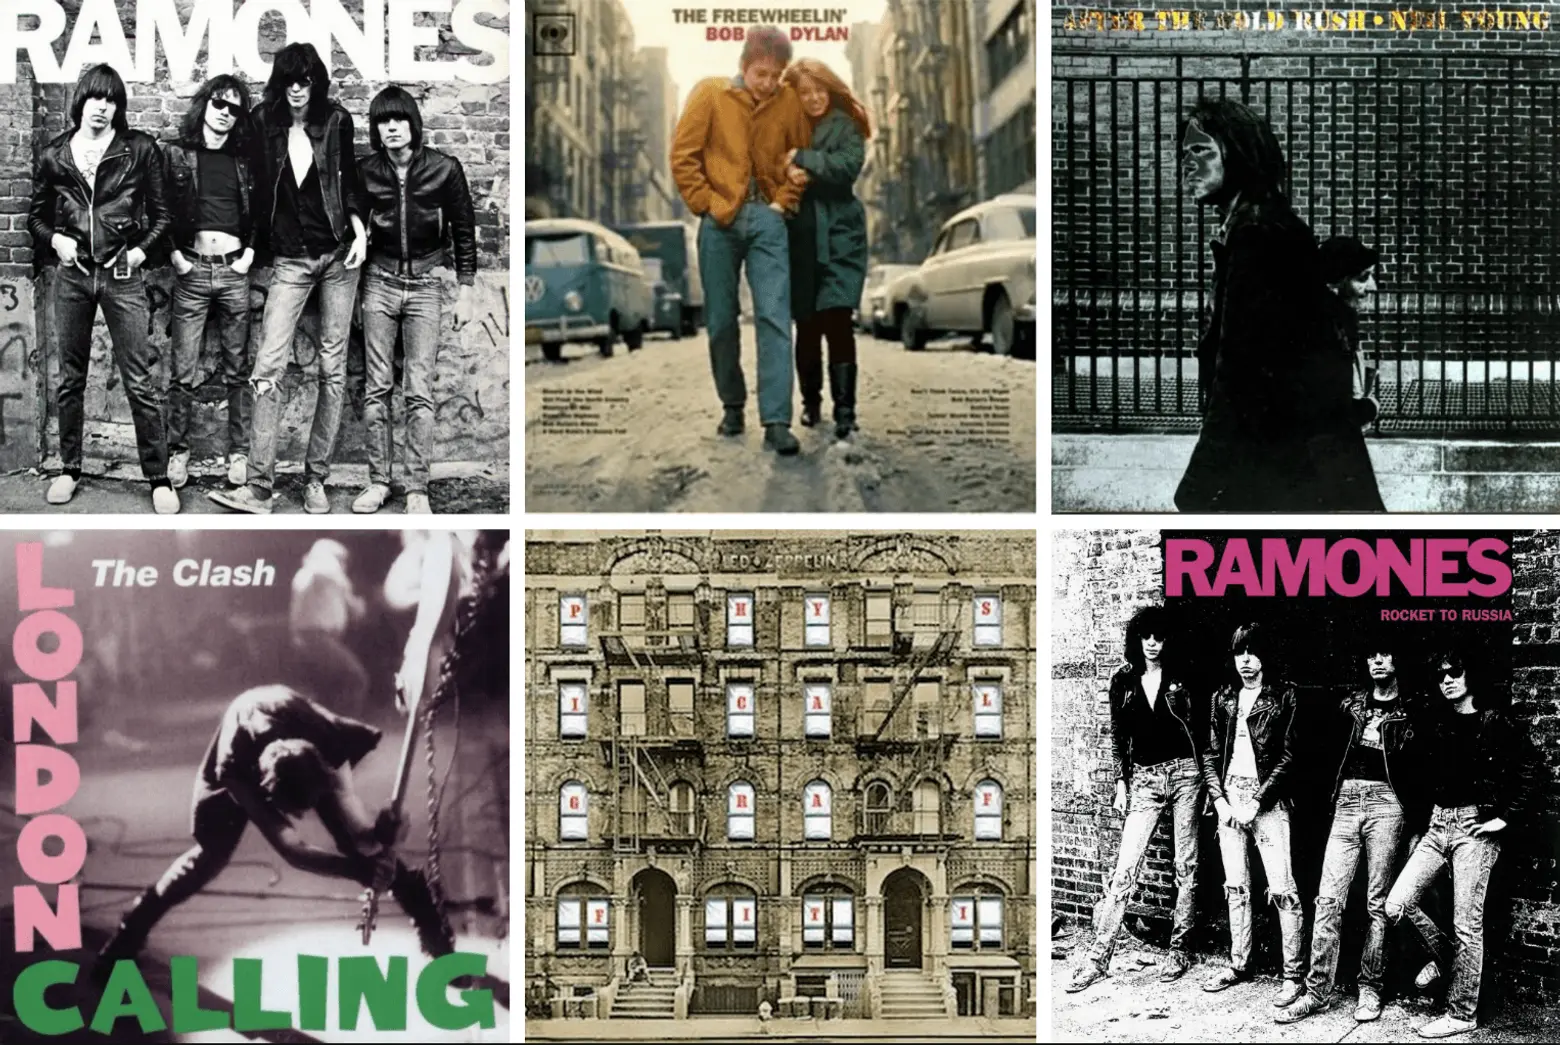 Iconic album covers of Greenwich Village and the East Village: Then and now